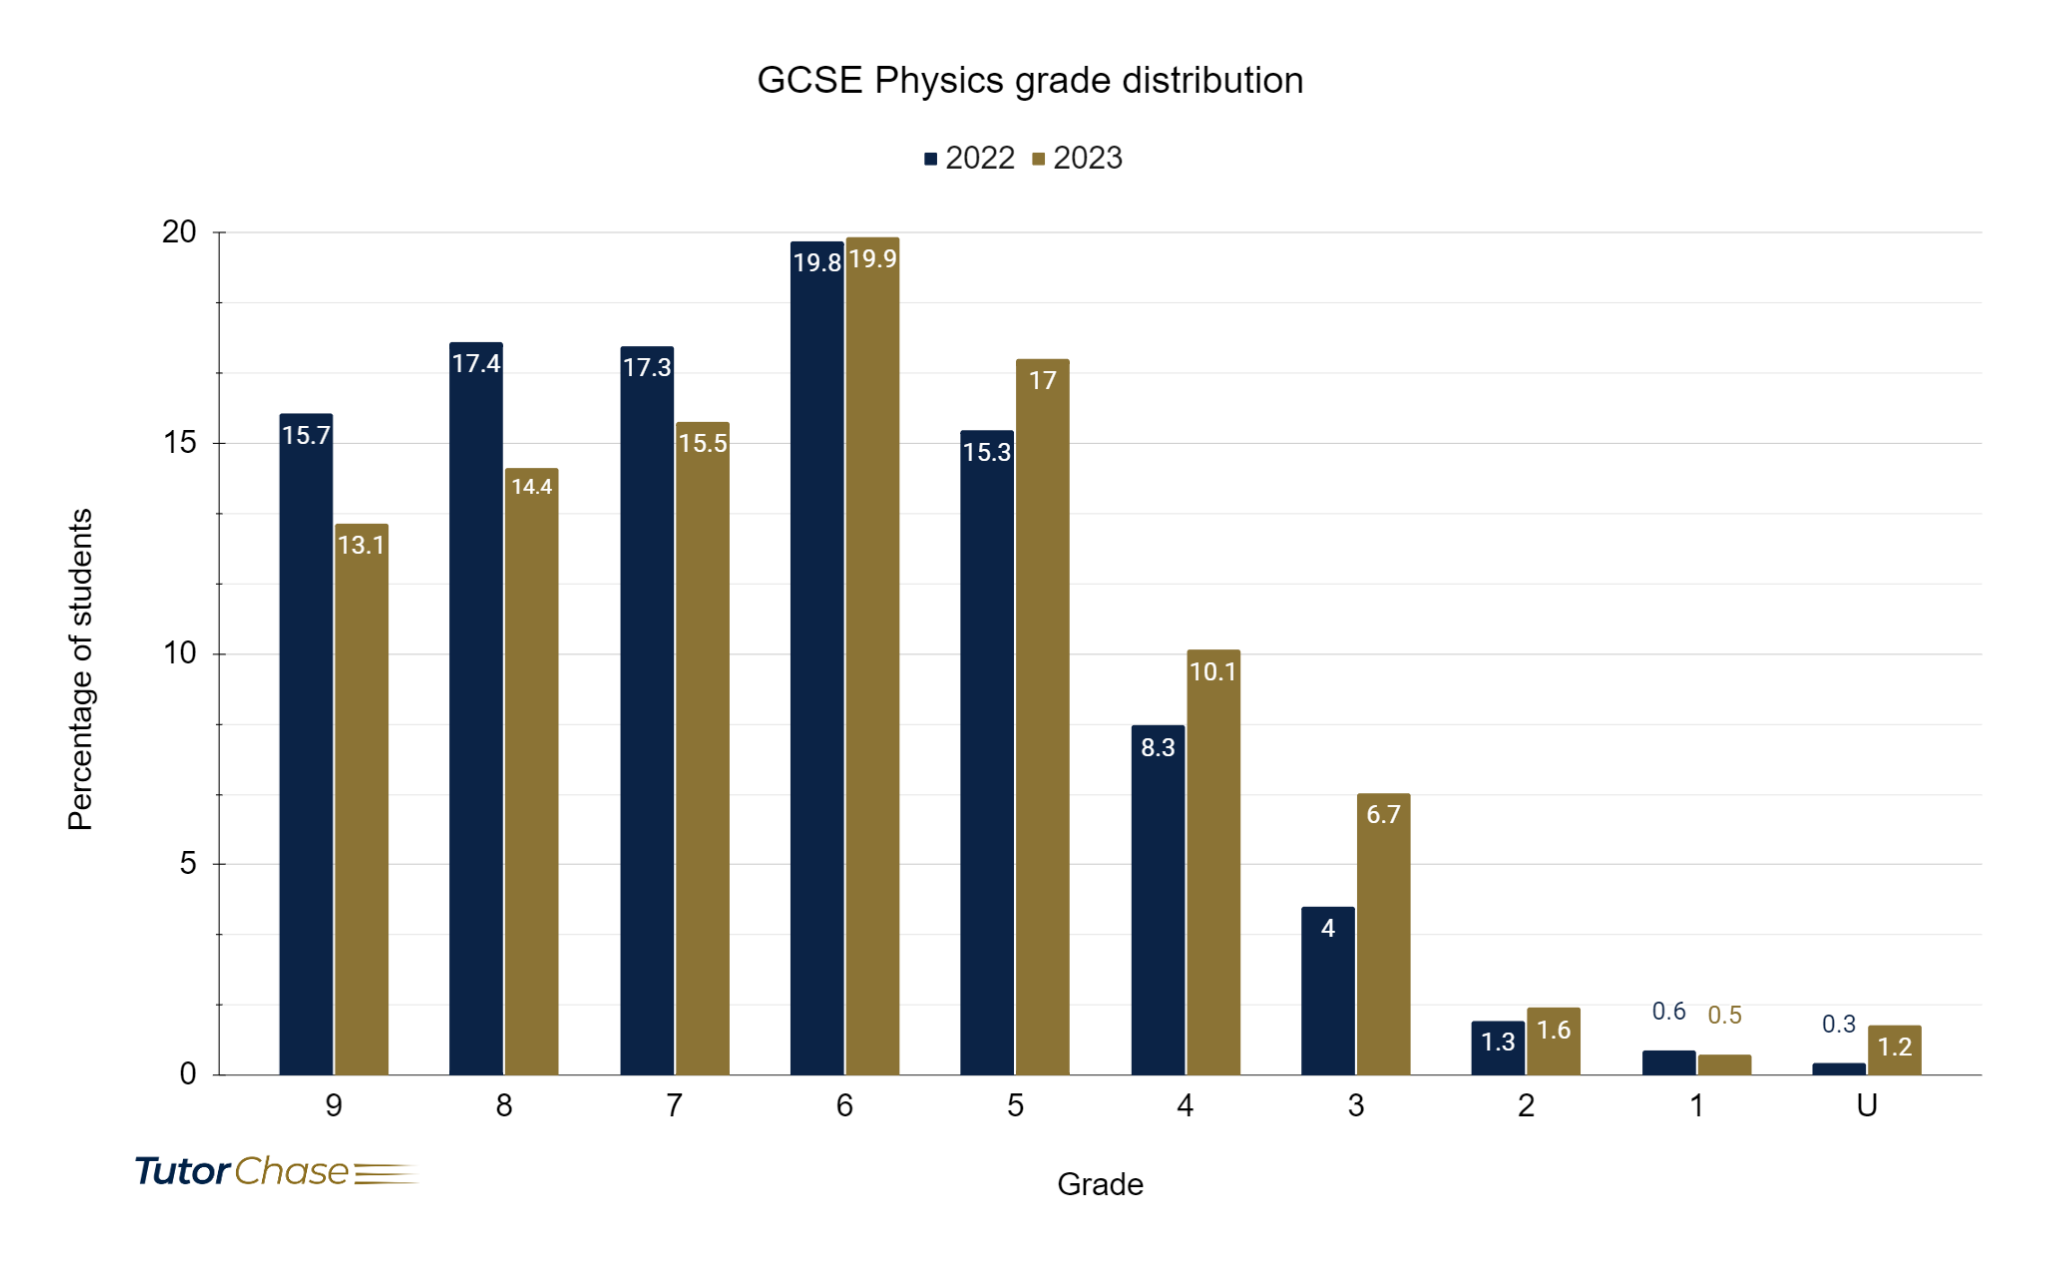 GCSE Physics grade distribution for 2022 and 2023